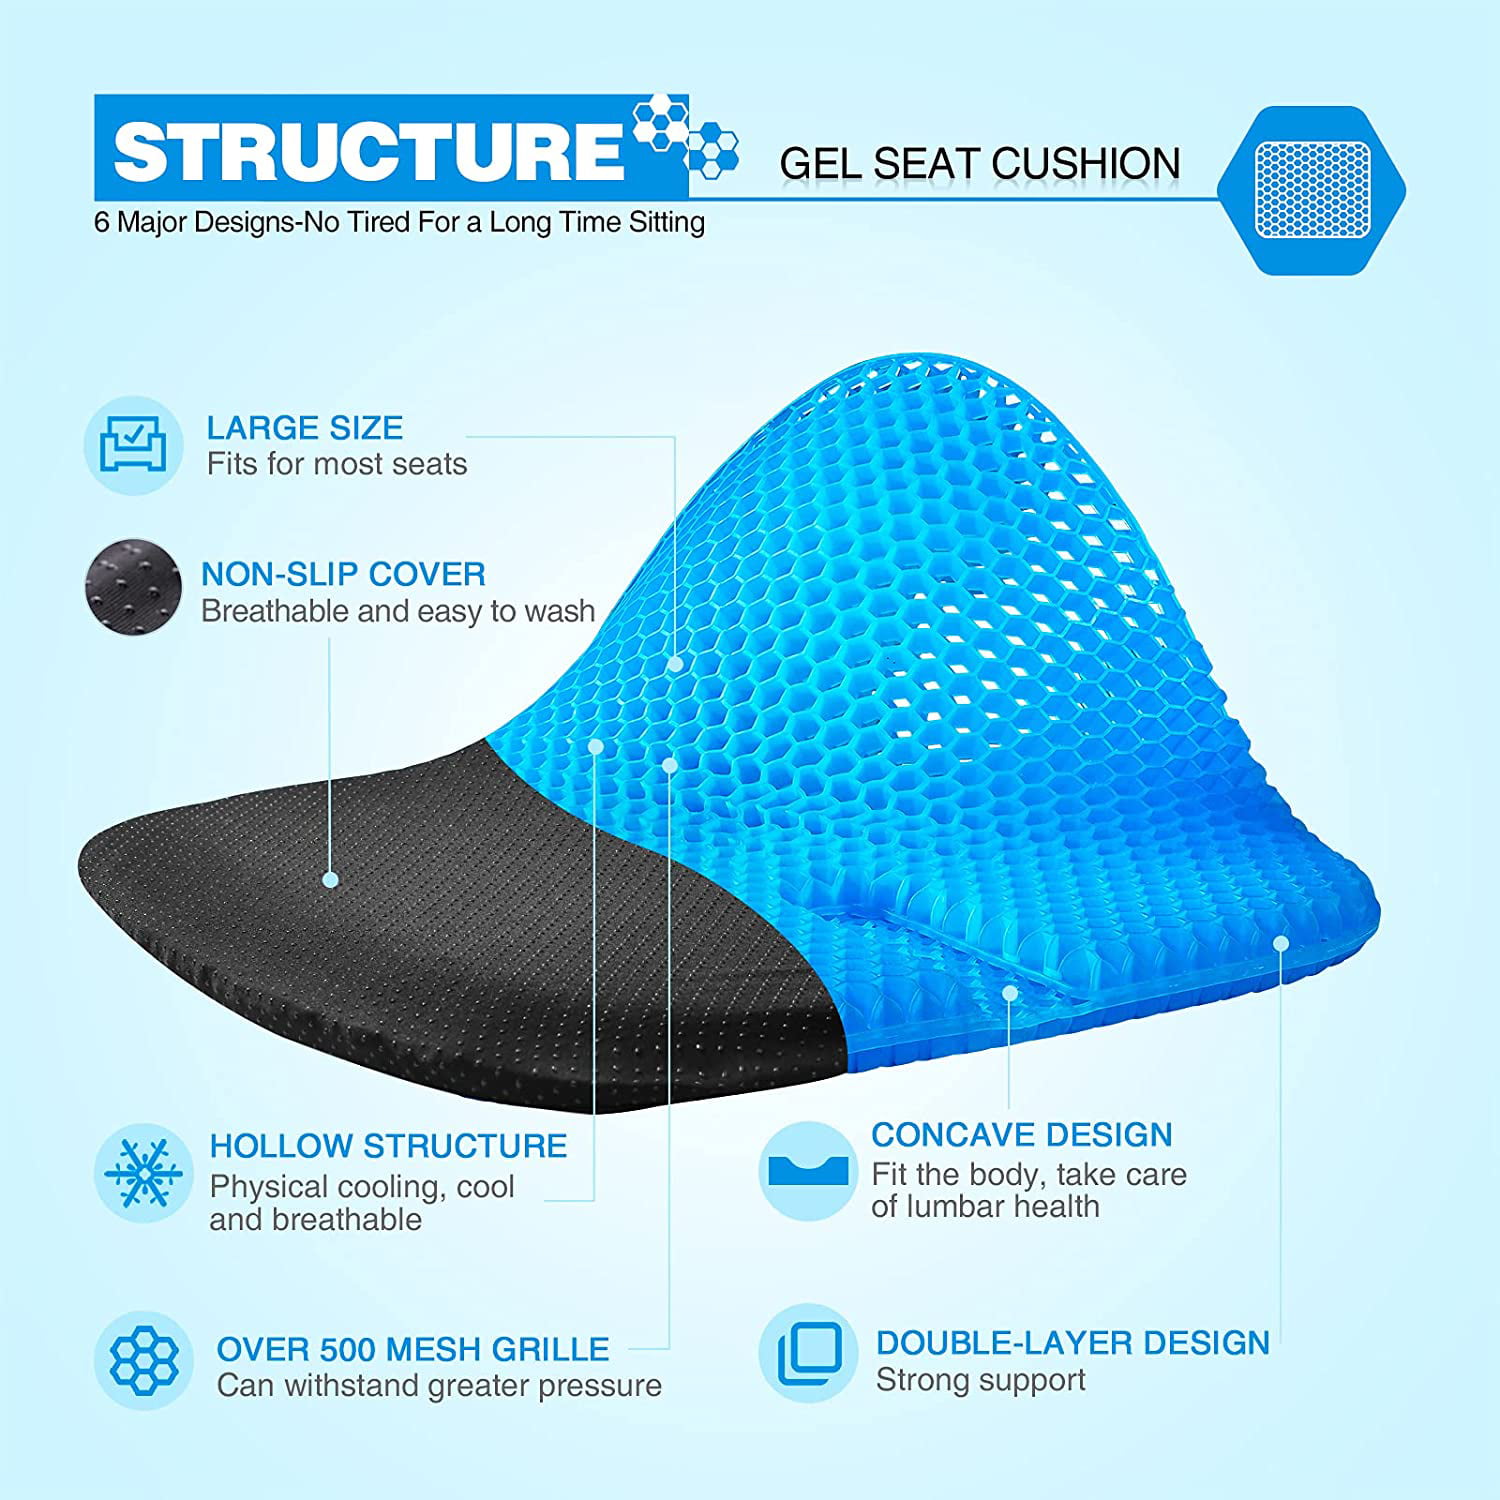 btdzdd Gel Seat Cushion Double Thick Gel Cushion,Non-Slip Cover,Help in Relieving Back Pain & Sciatica Pain,Breathable Wheelchair Cushion Chair Pads for Car Seat Office Chair（Black） 